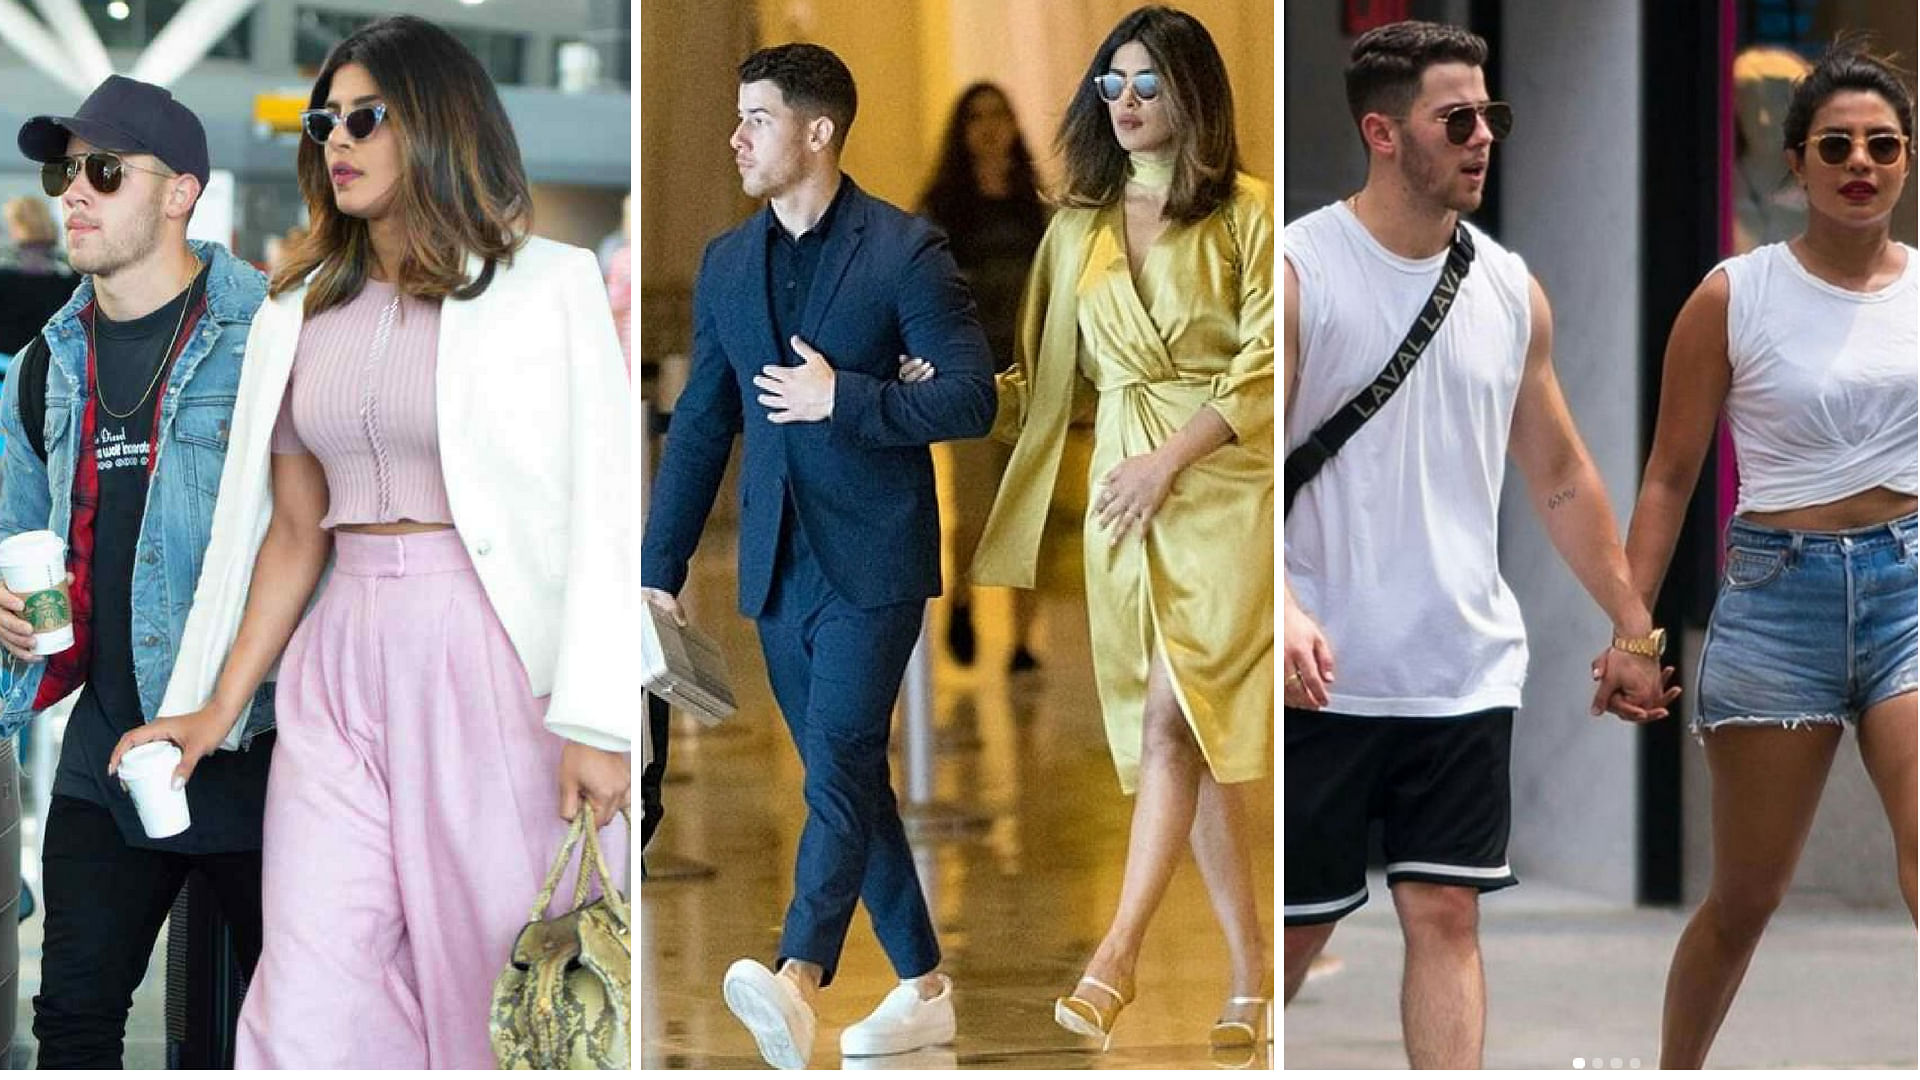 People magazine has confirmed that Priyanka and Nick Jonas are officially engaged.